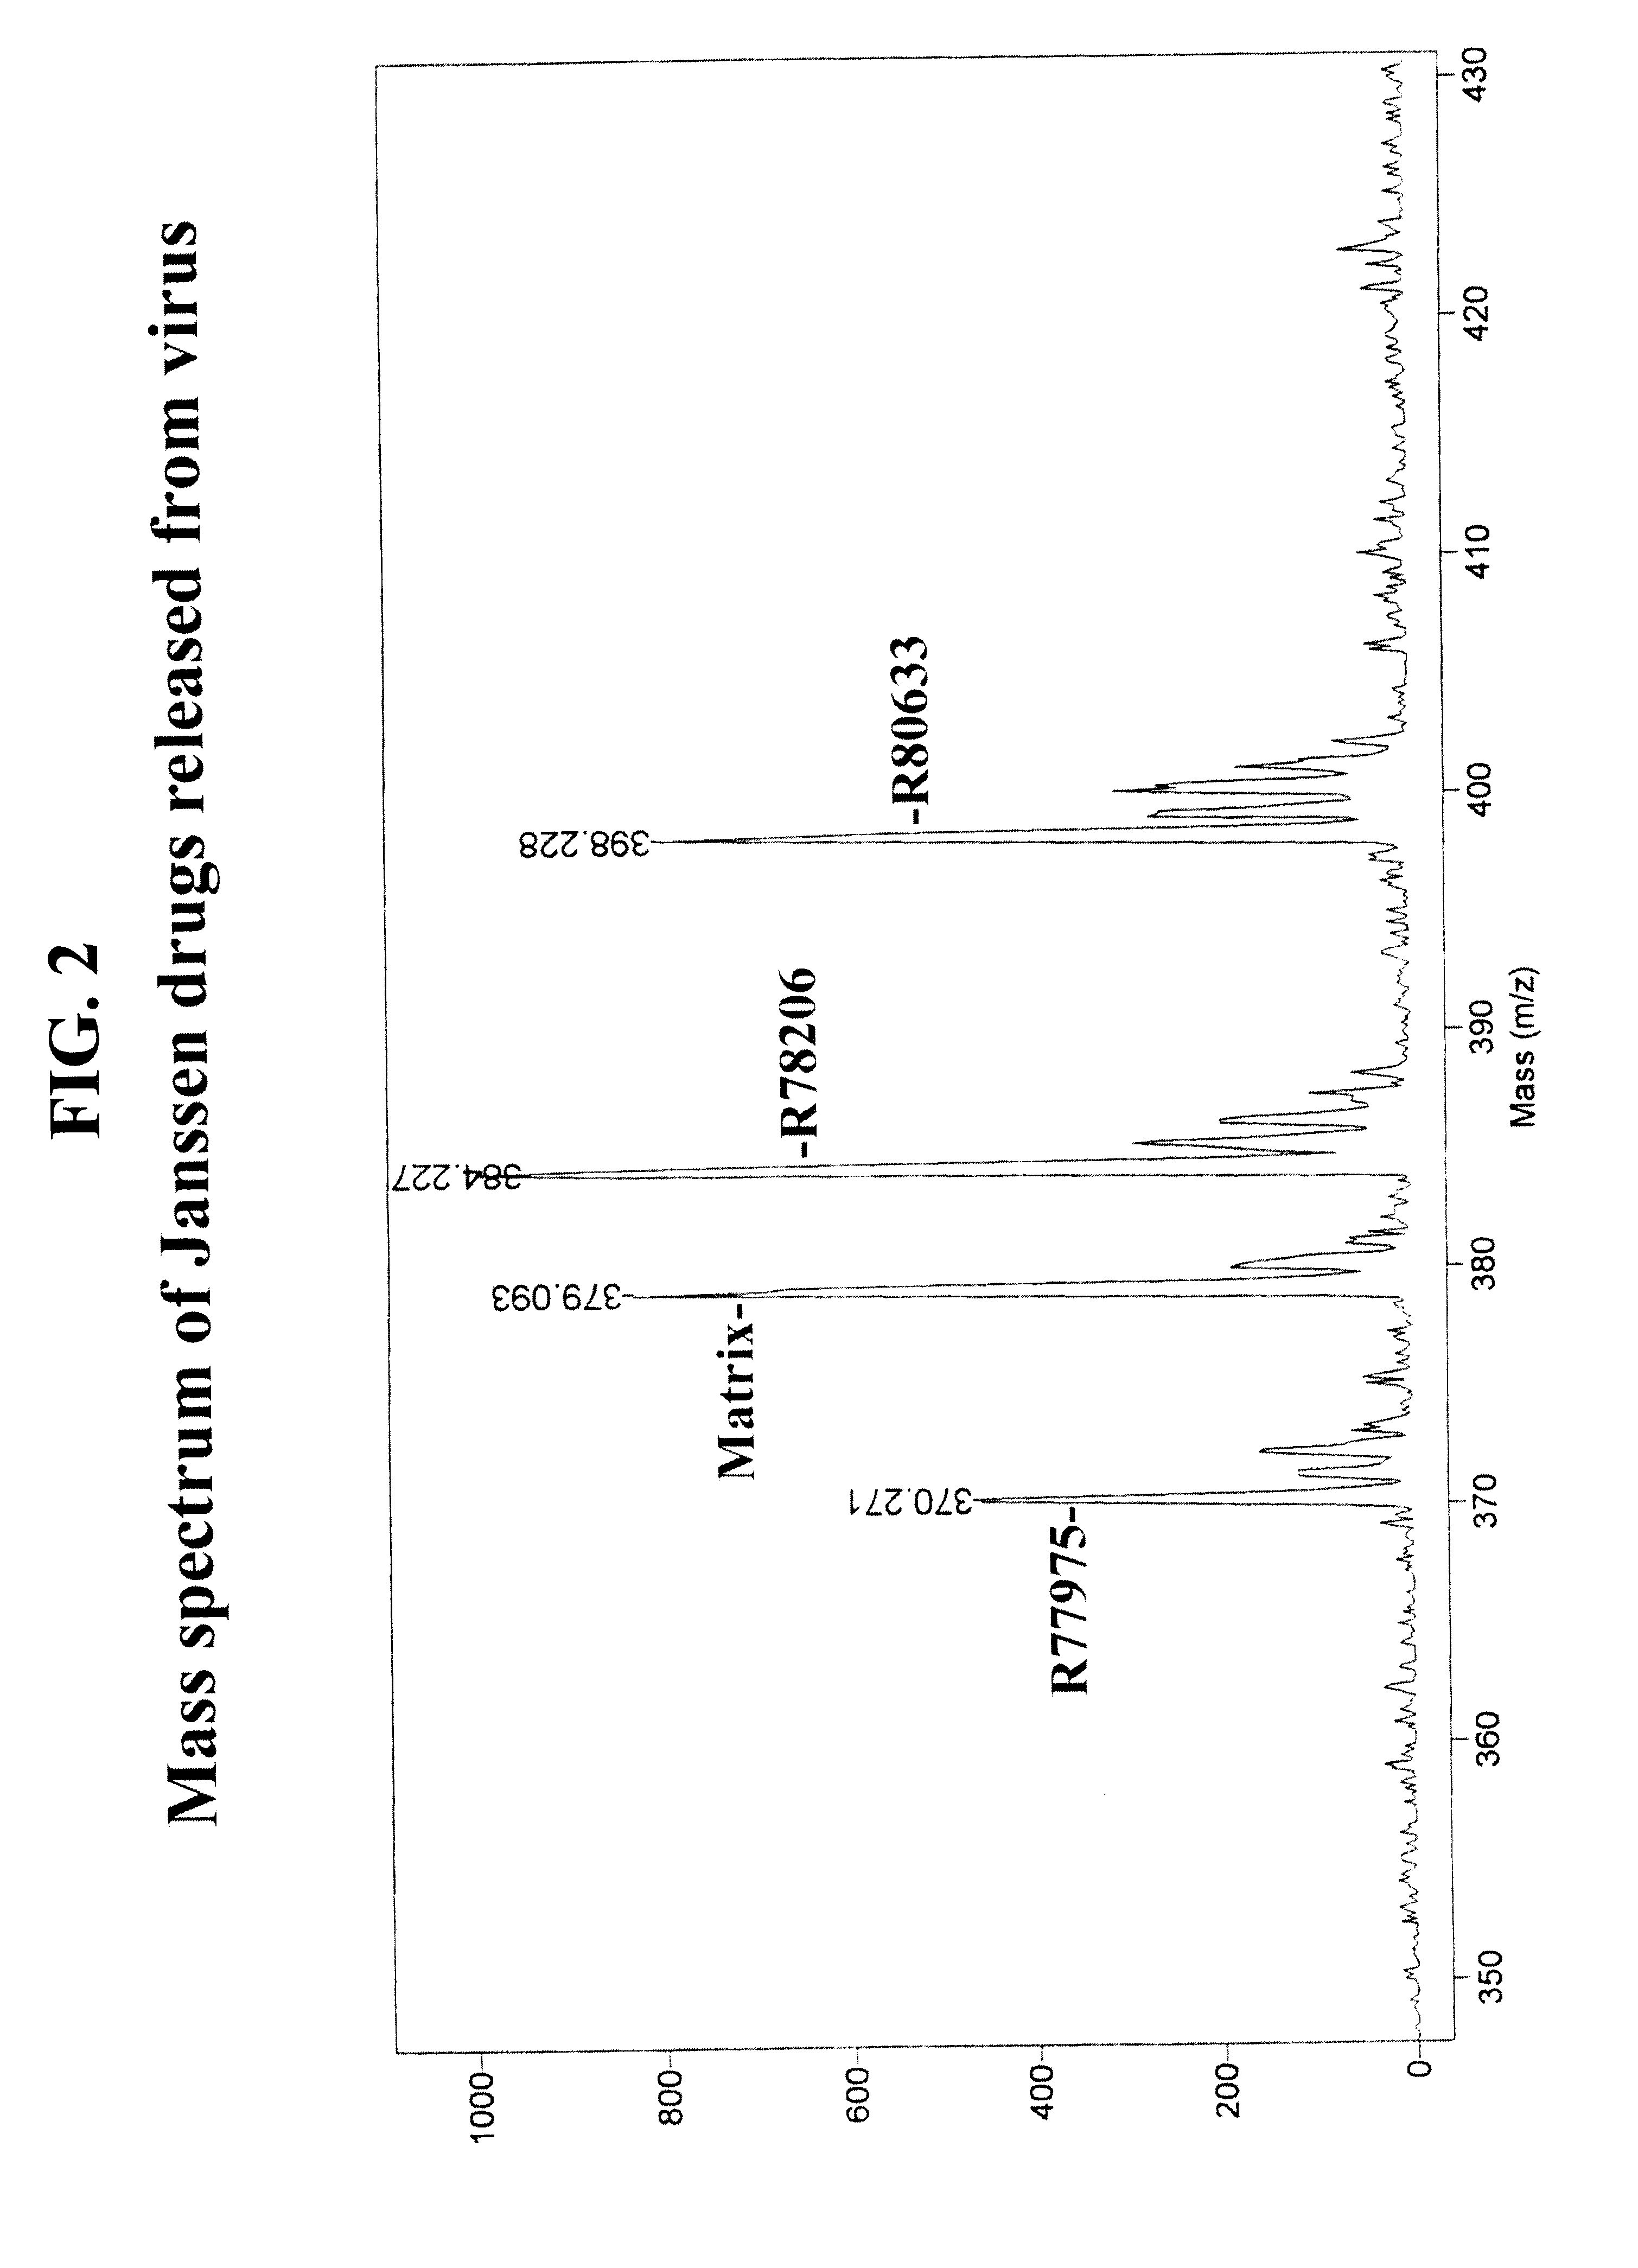 Method for identifying new anti-picornaviral compounds